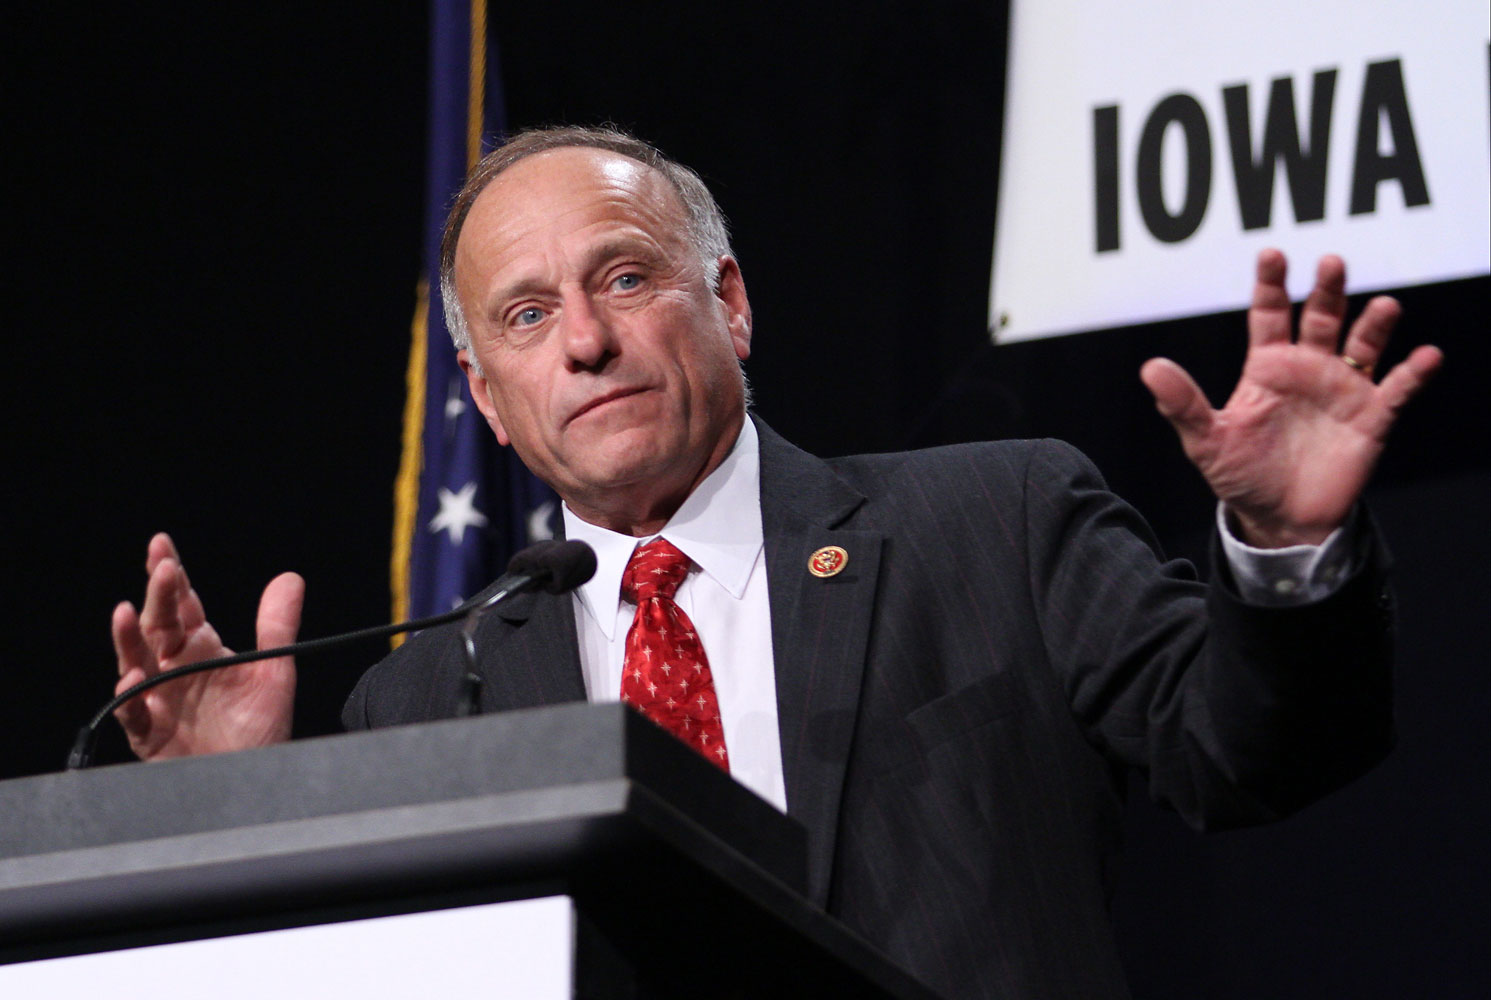 Rep. Steve King speaks during the Iowa Faith and Freedom Coalition's Friends of the Family Banquet in Des Moines, Iowa, Nov. 9, 2013. (Justin Hayworth—AP)